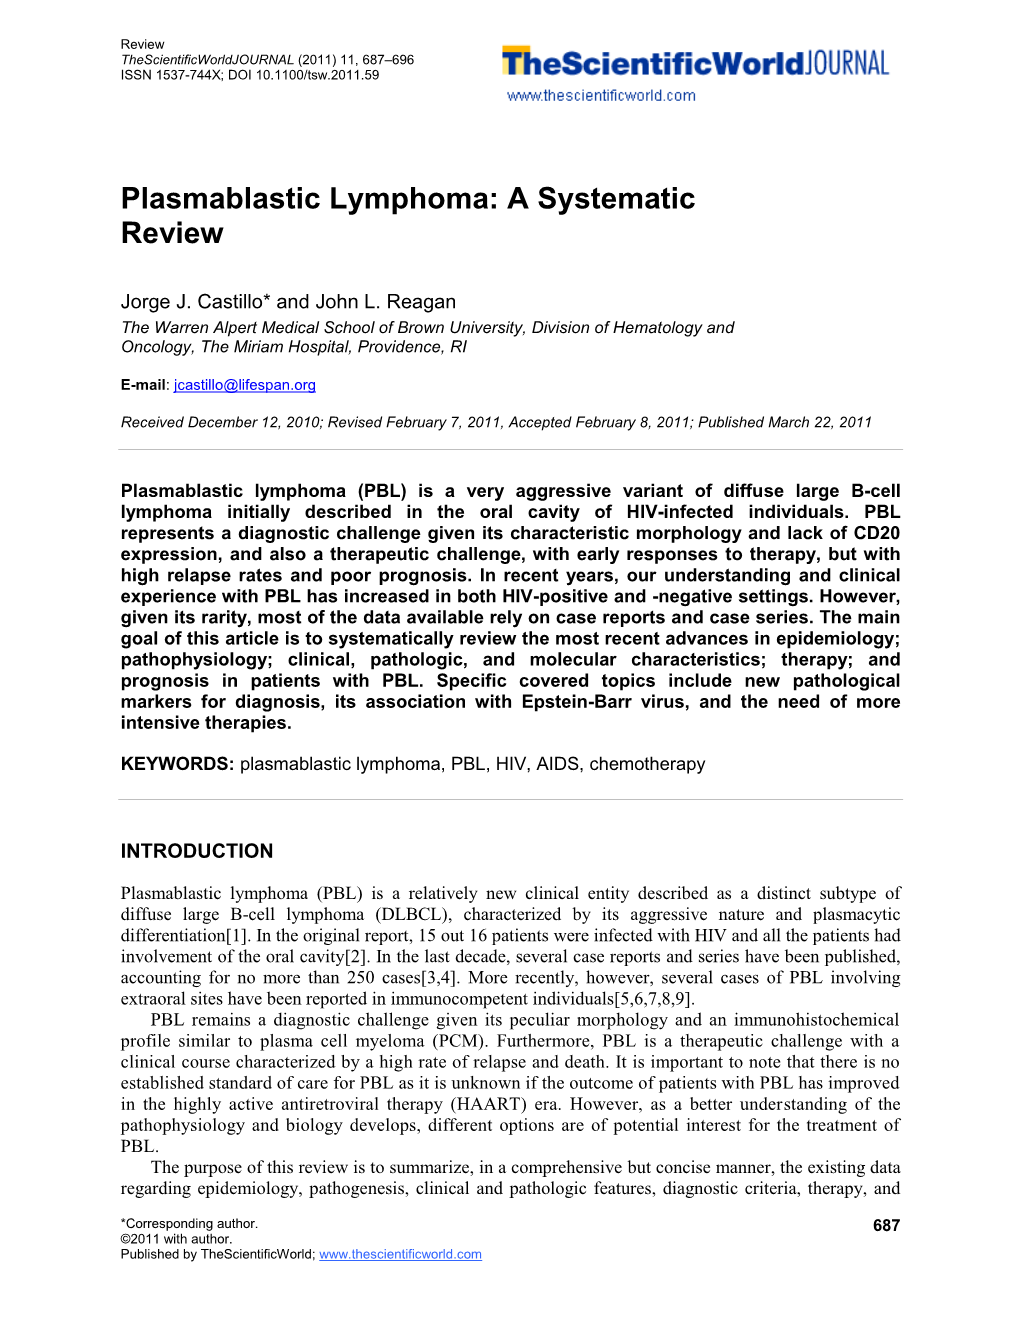 Plasmablastic Lymphoma: a Systematic Review